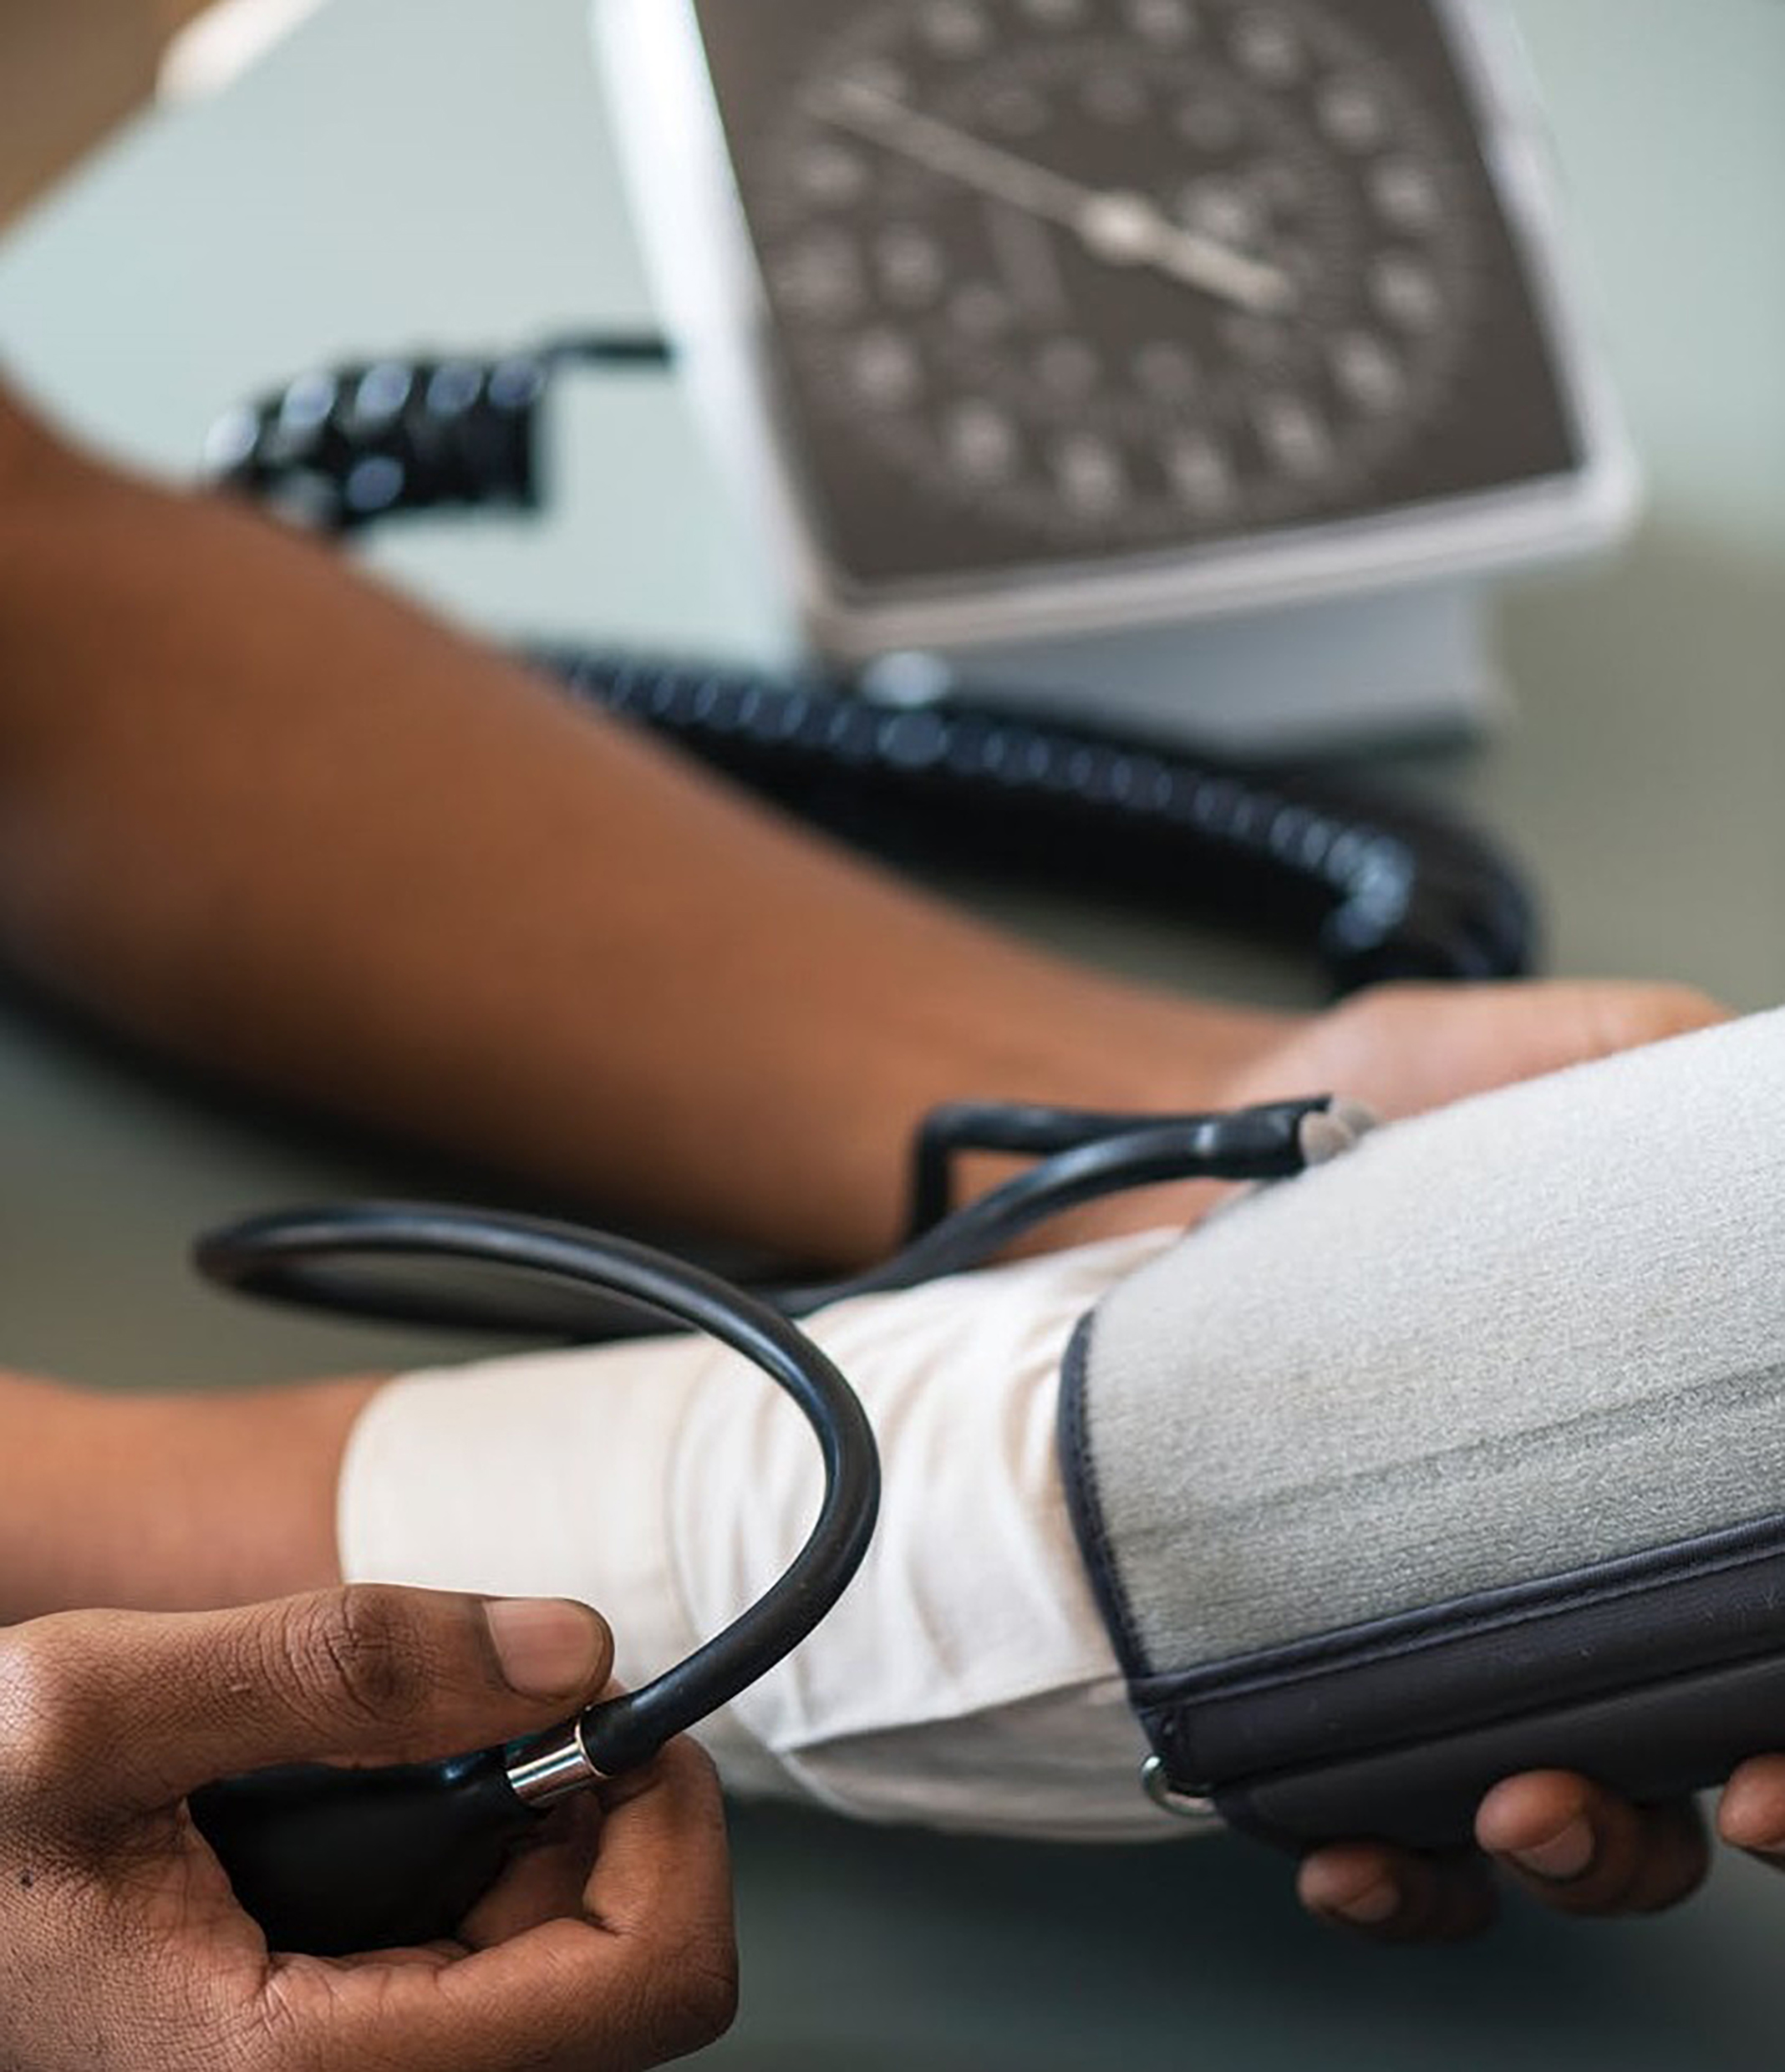 I’m Worried My Blood Pressure Is Too High, How Can I Lower It?